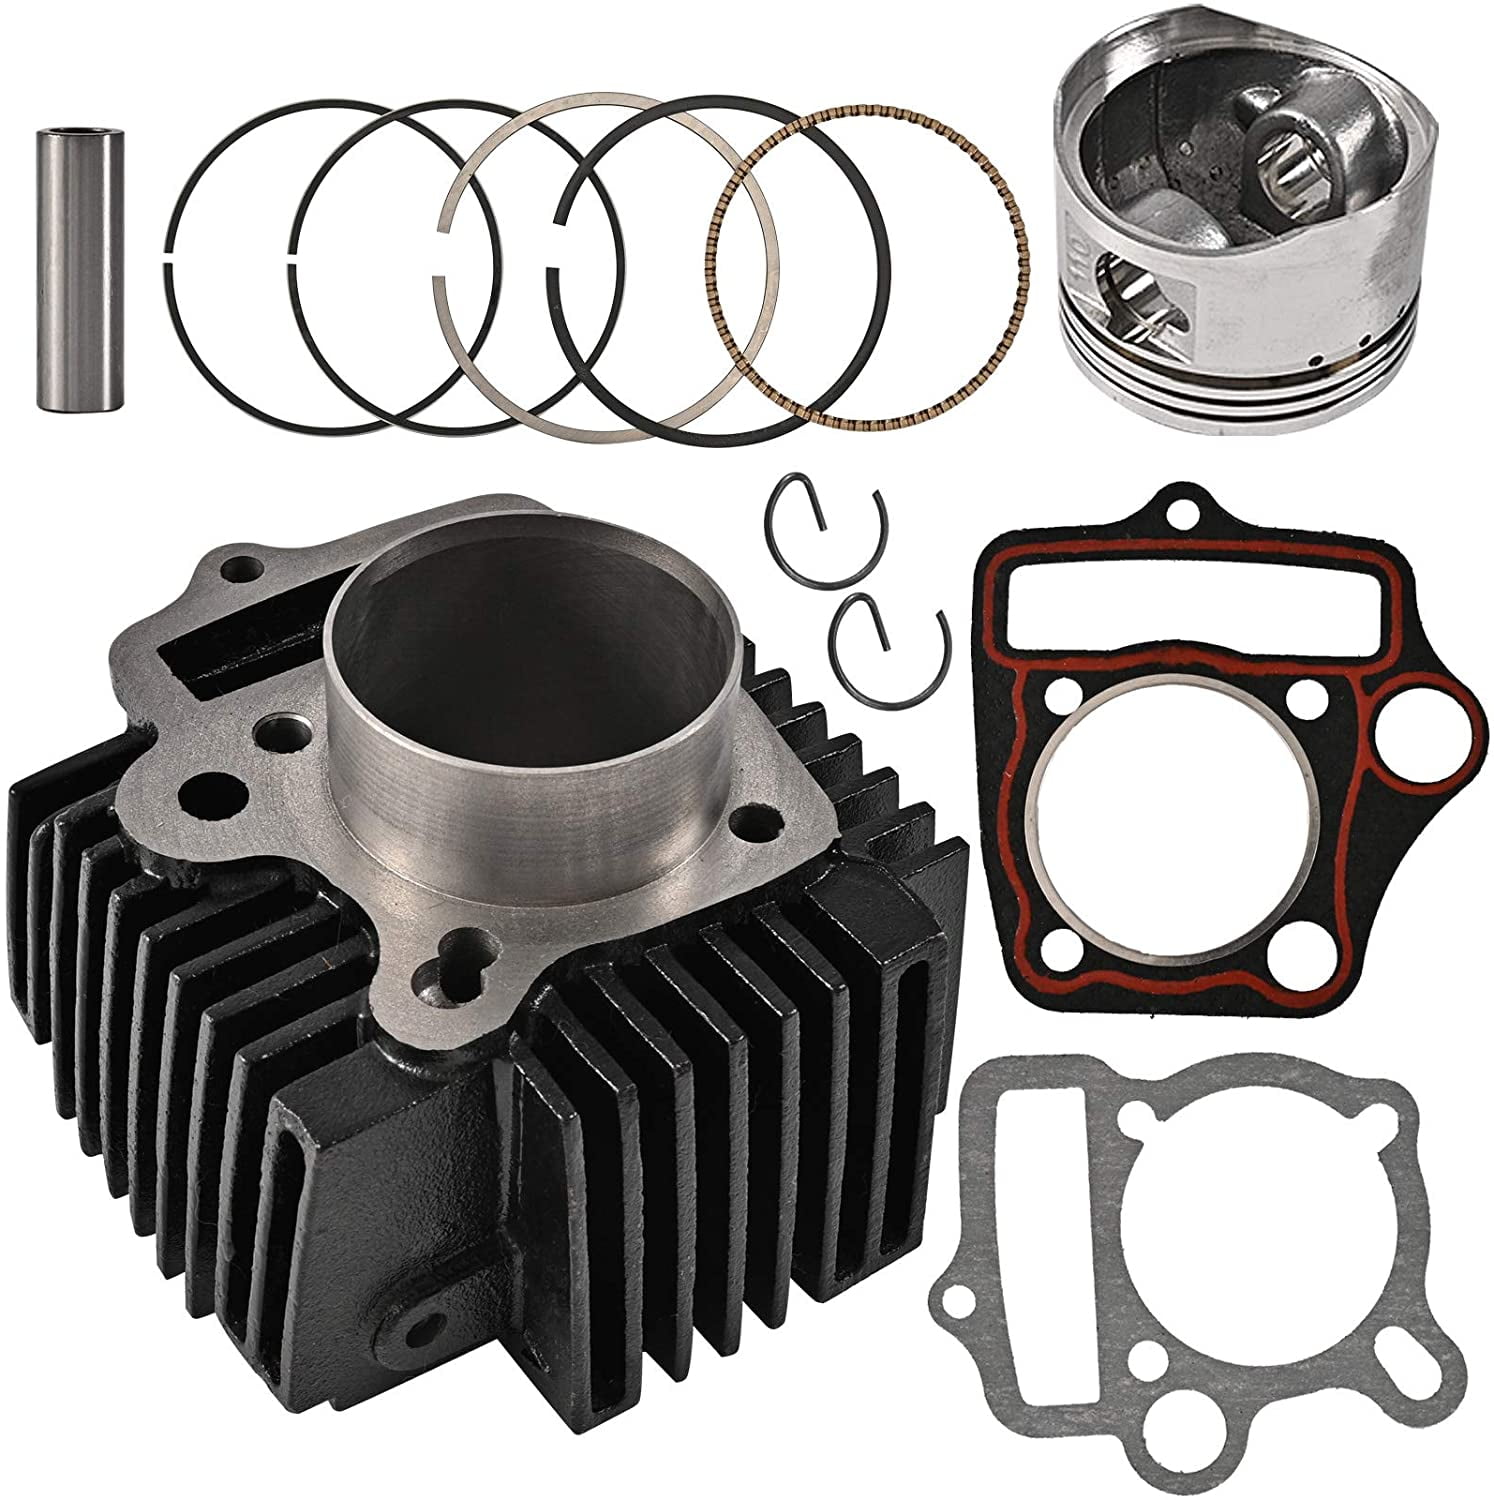 Trkimal 52.4mm Engine Parts Cylinder big bore kits with Gaskets and Piston  Set for Stroke Chinese TaoTao Coolster ATV 110cc Pit Quad Dirt Bike Go  Kart